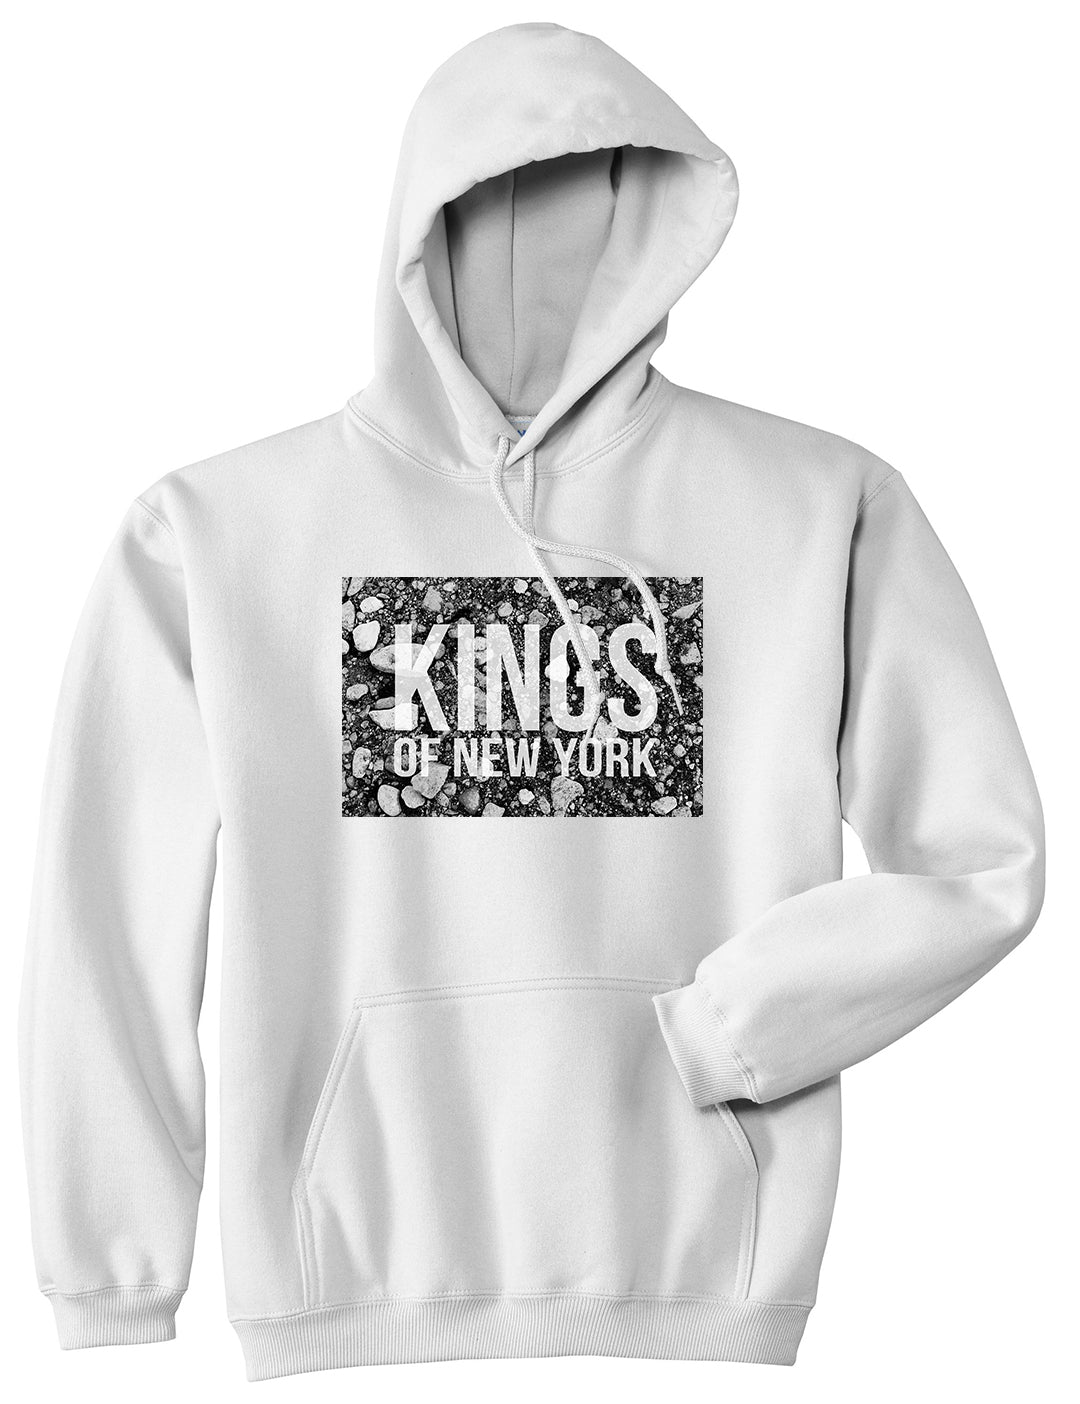 Came From The Dirt KONY Mens Pullover Hoodie White